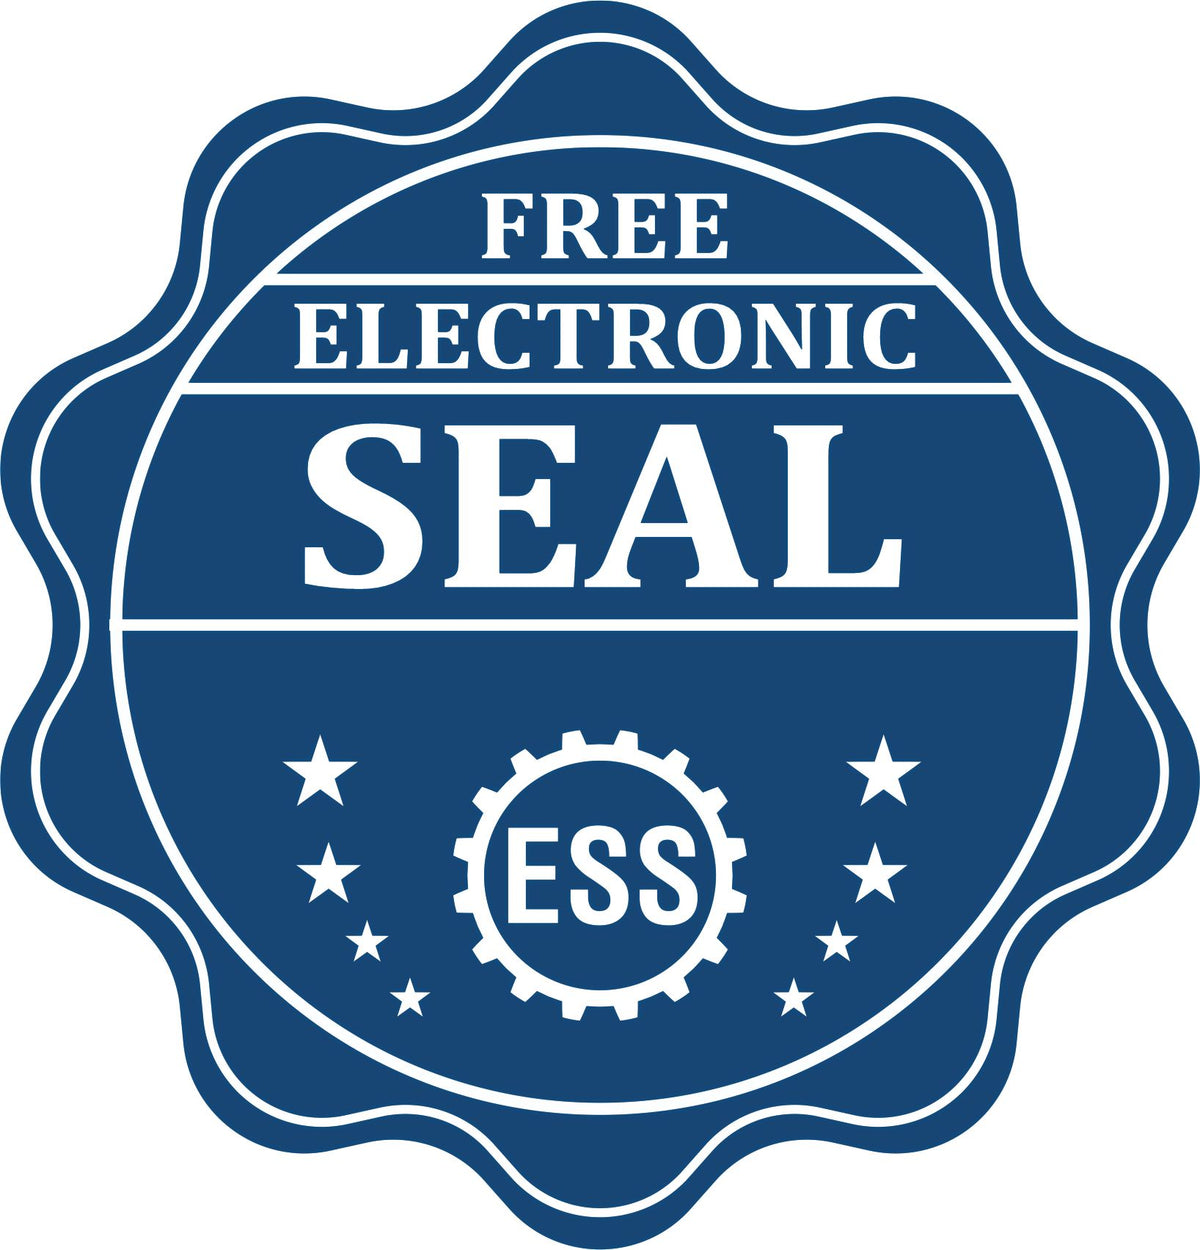 A badge showing a free electronic seal for the New Mexico Professional Geologist Seal Stamp with stars and the ESS gear on the emblem.